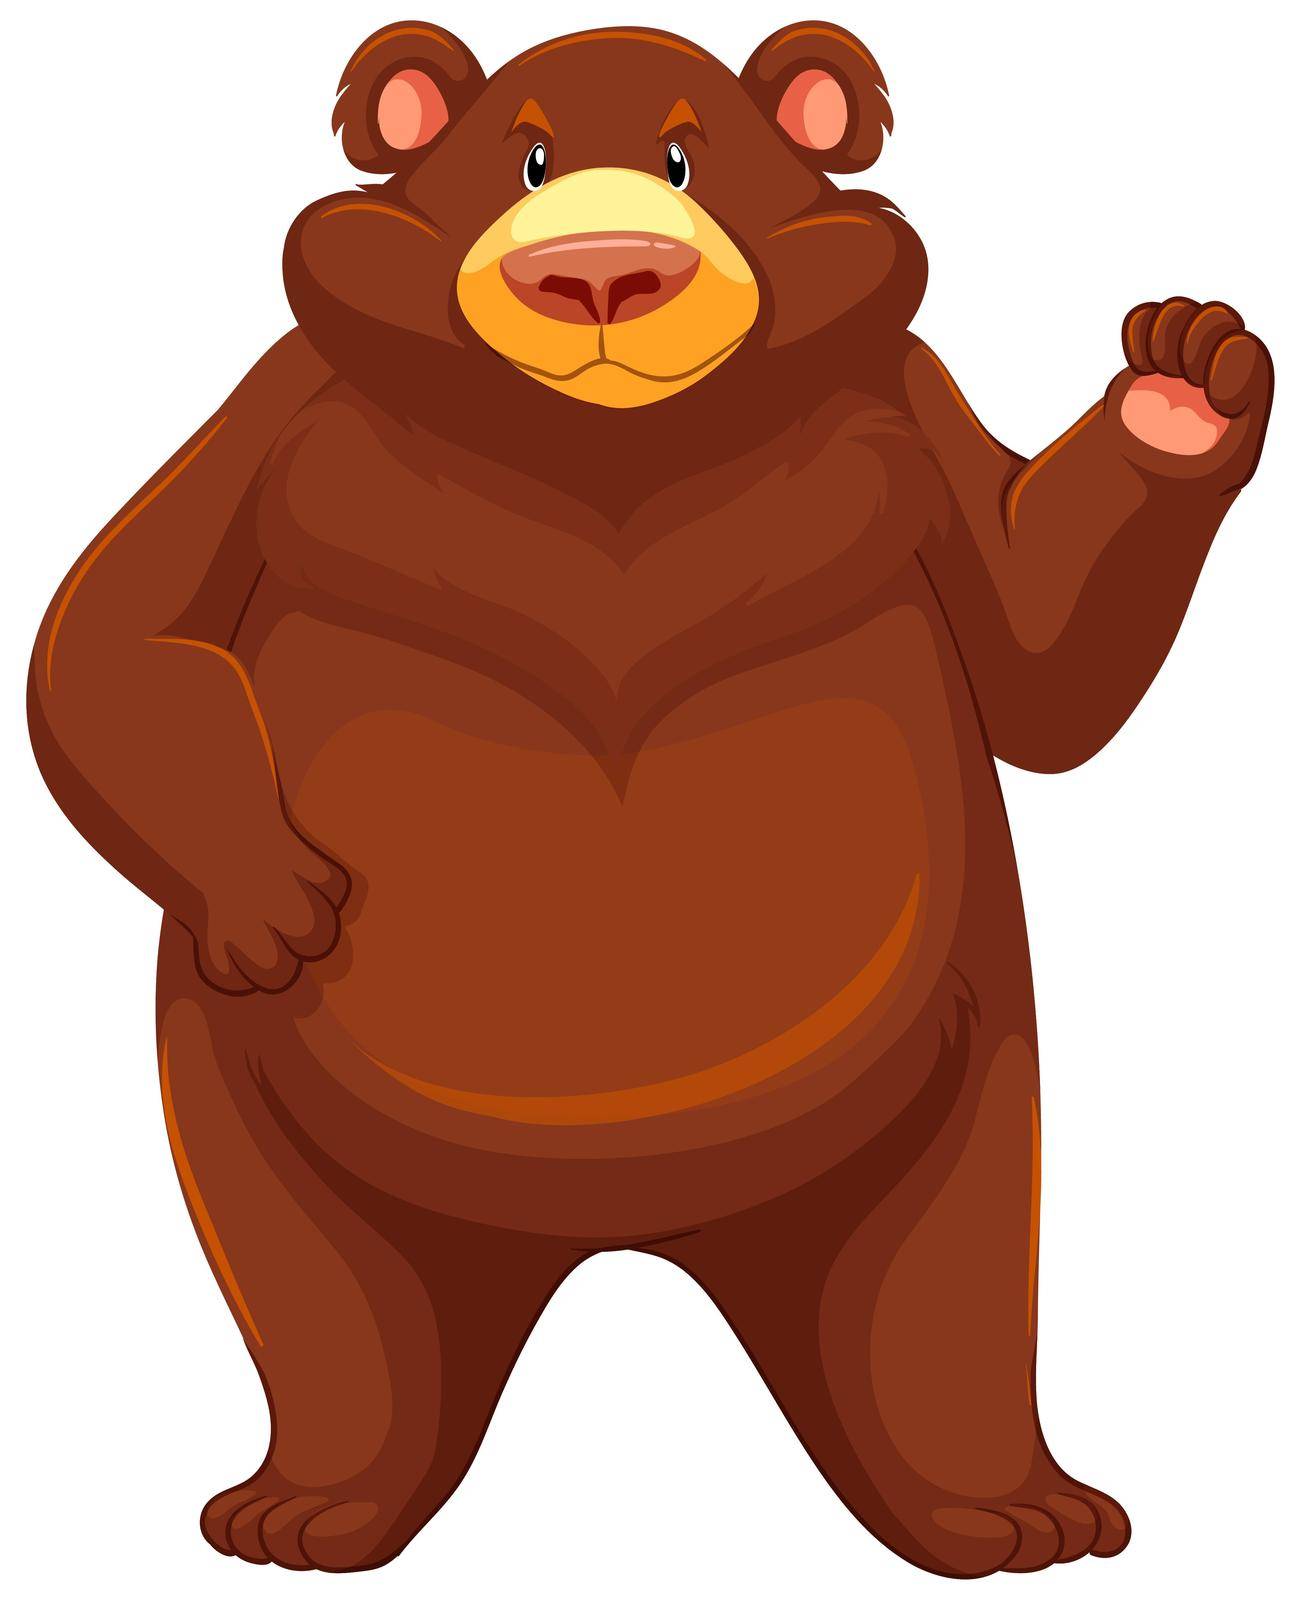 One big brown bear on a white background